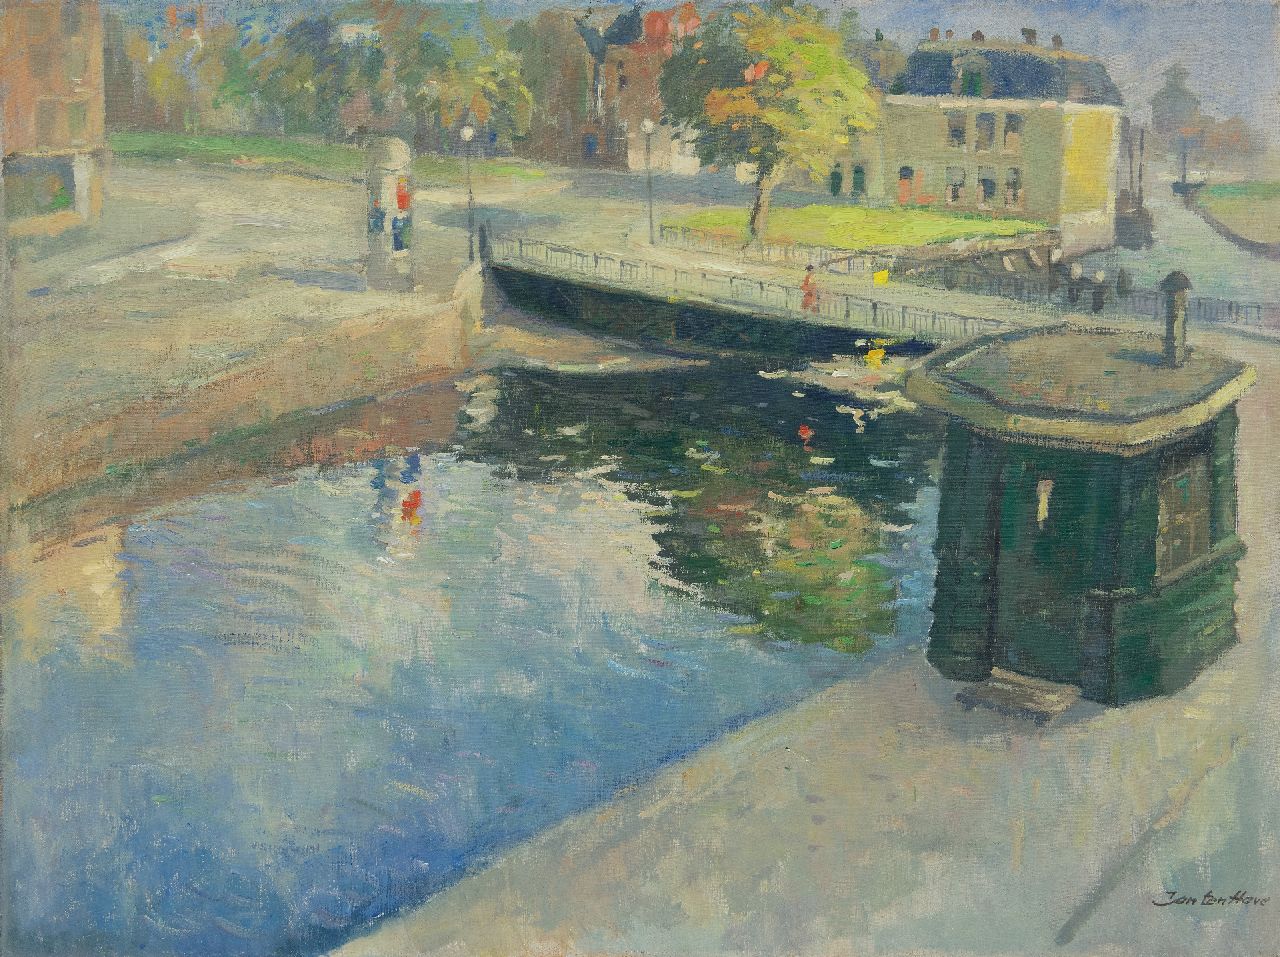 Jan ten Have | The Steentilbridge, Groningen, oil on canvas, 60.0 x 80.0 cm, signed l.r. and painted ca. 1925-1930